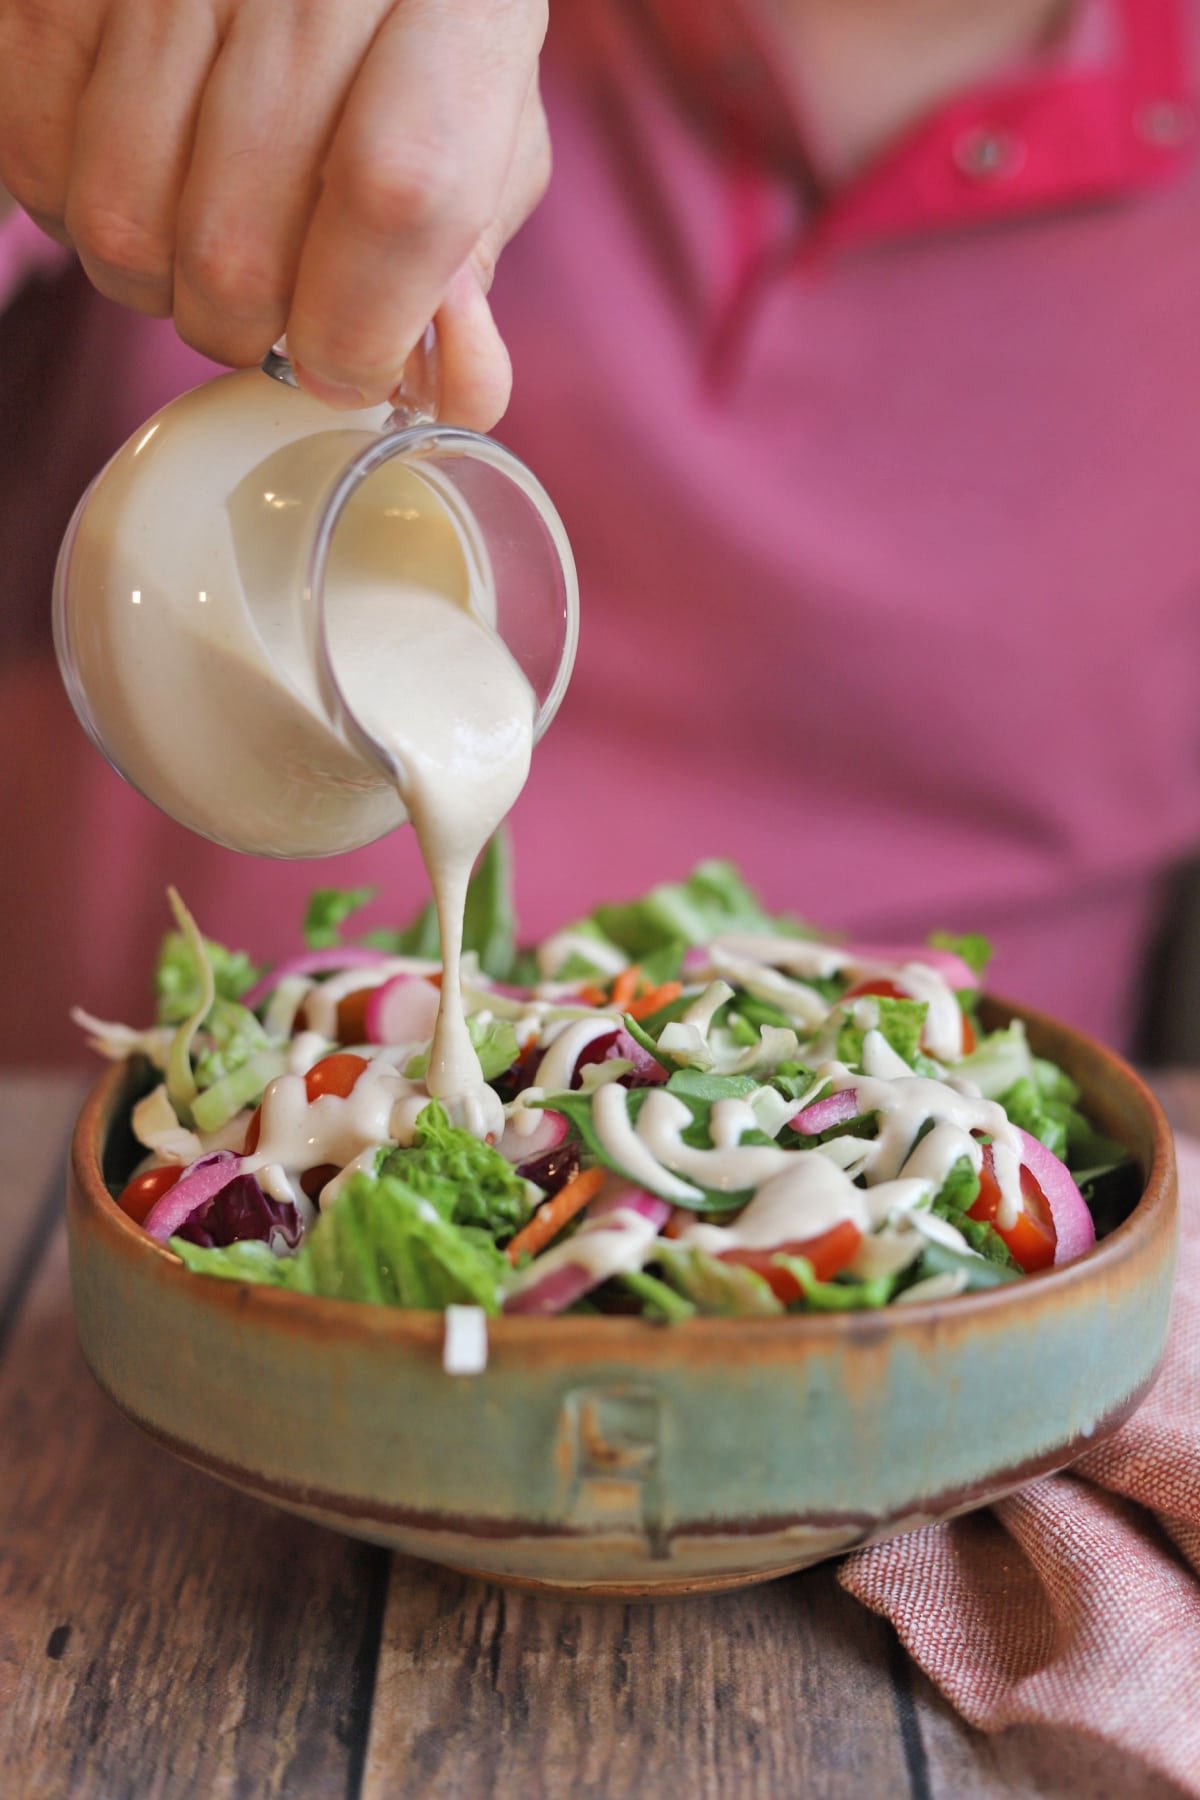 Tahini dressing being poured onto leafy green salad.